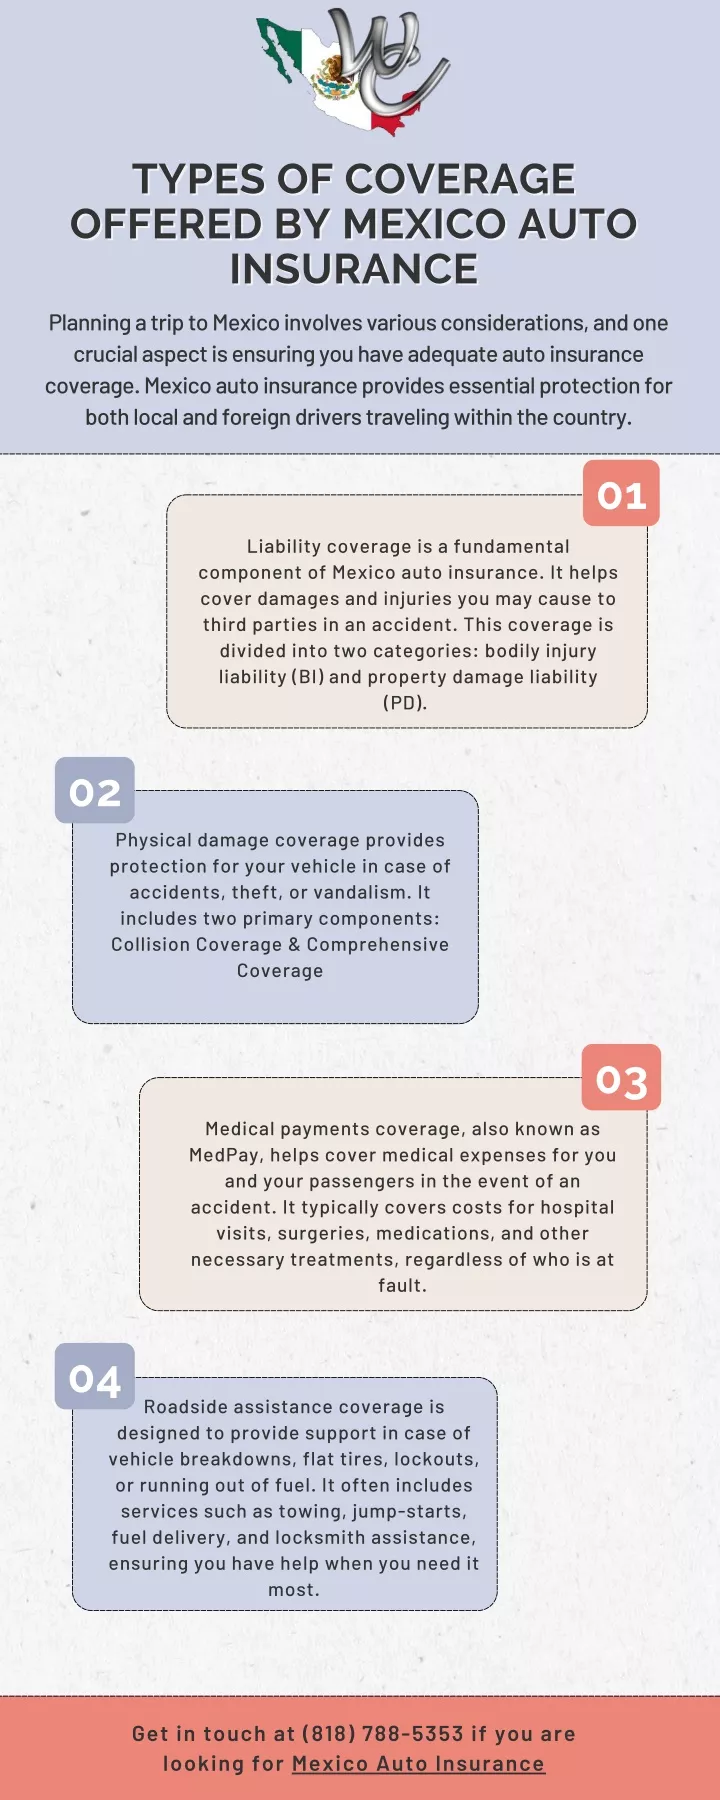 types of coverage types of coverage offered